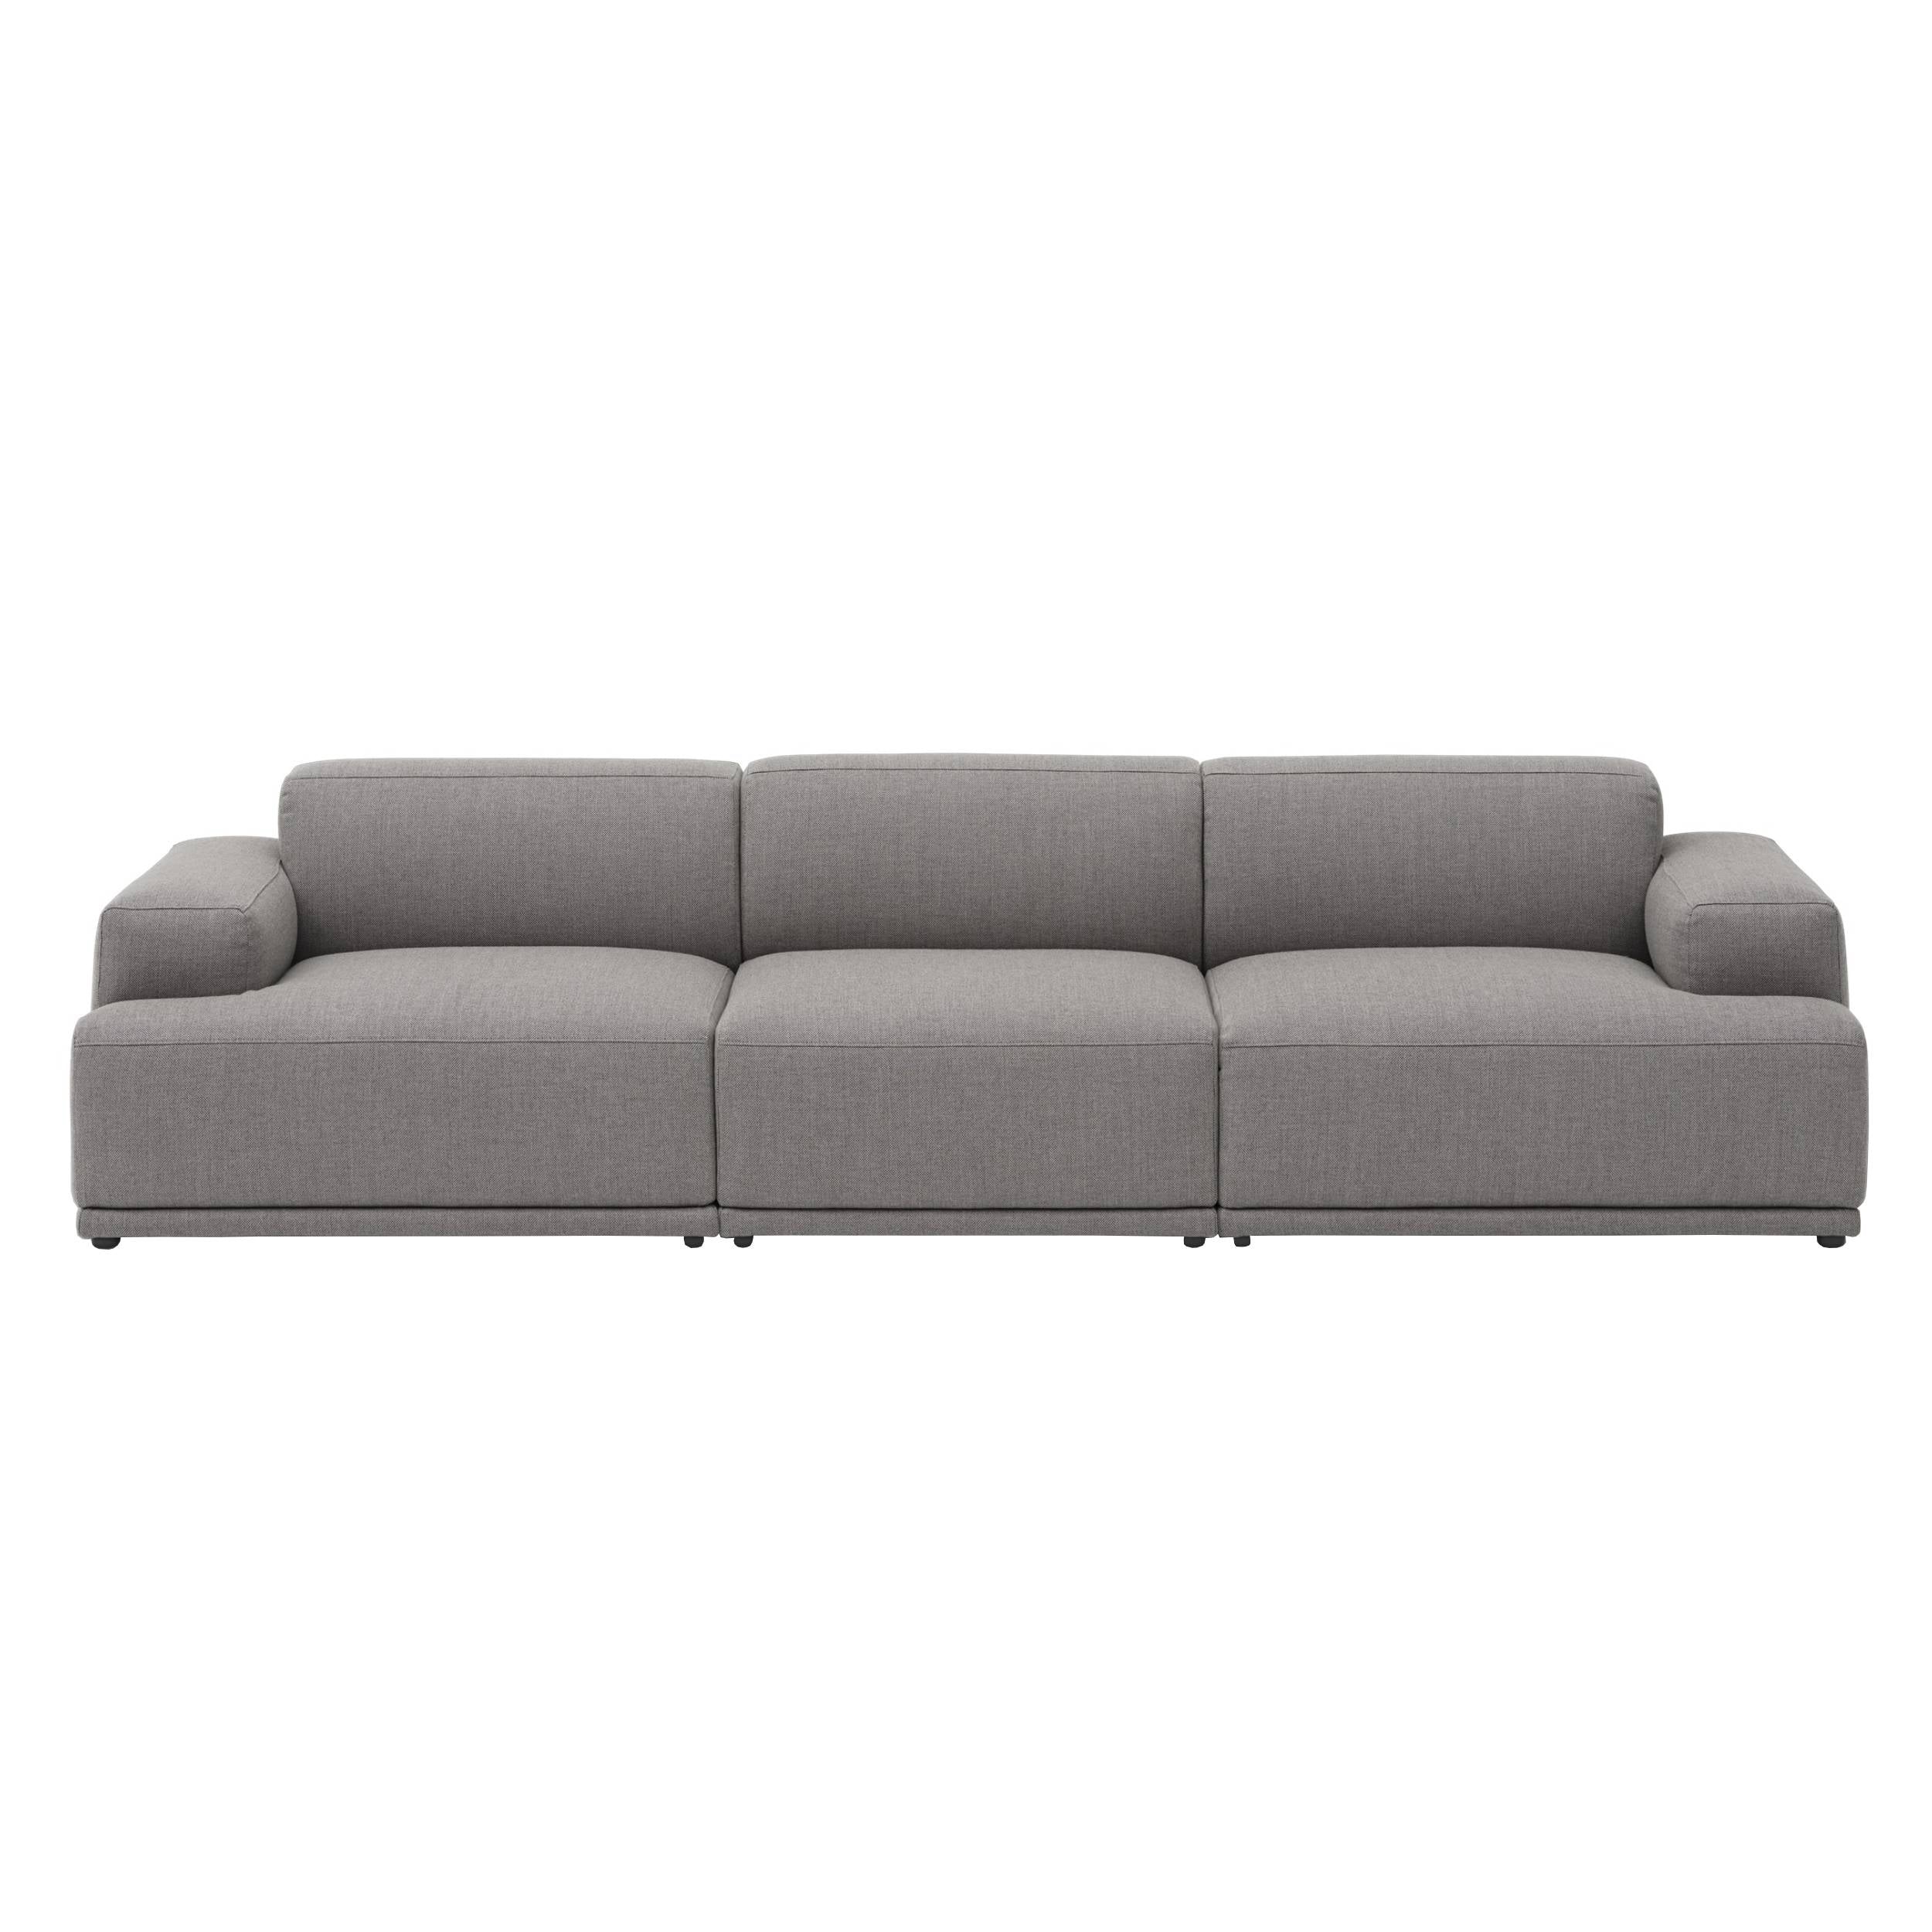 Connect Soft Modular Sofa: 3 Seater + Configuration 1 + Re-Wool 128